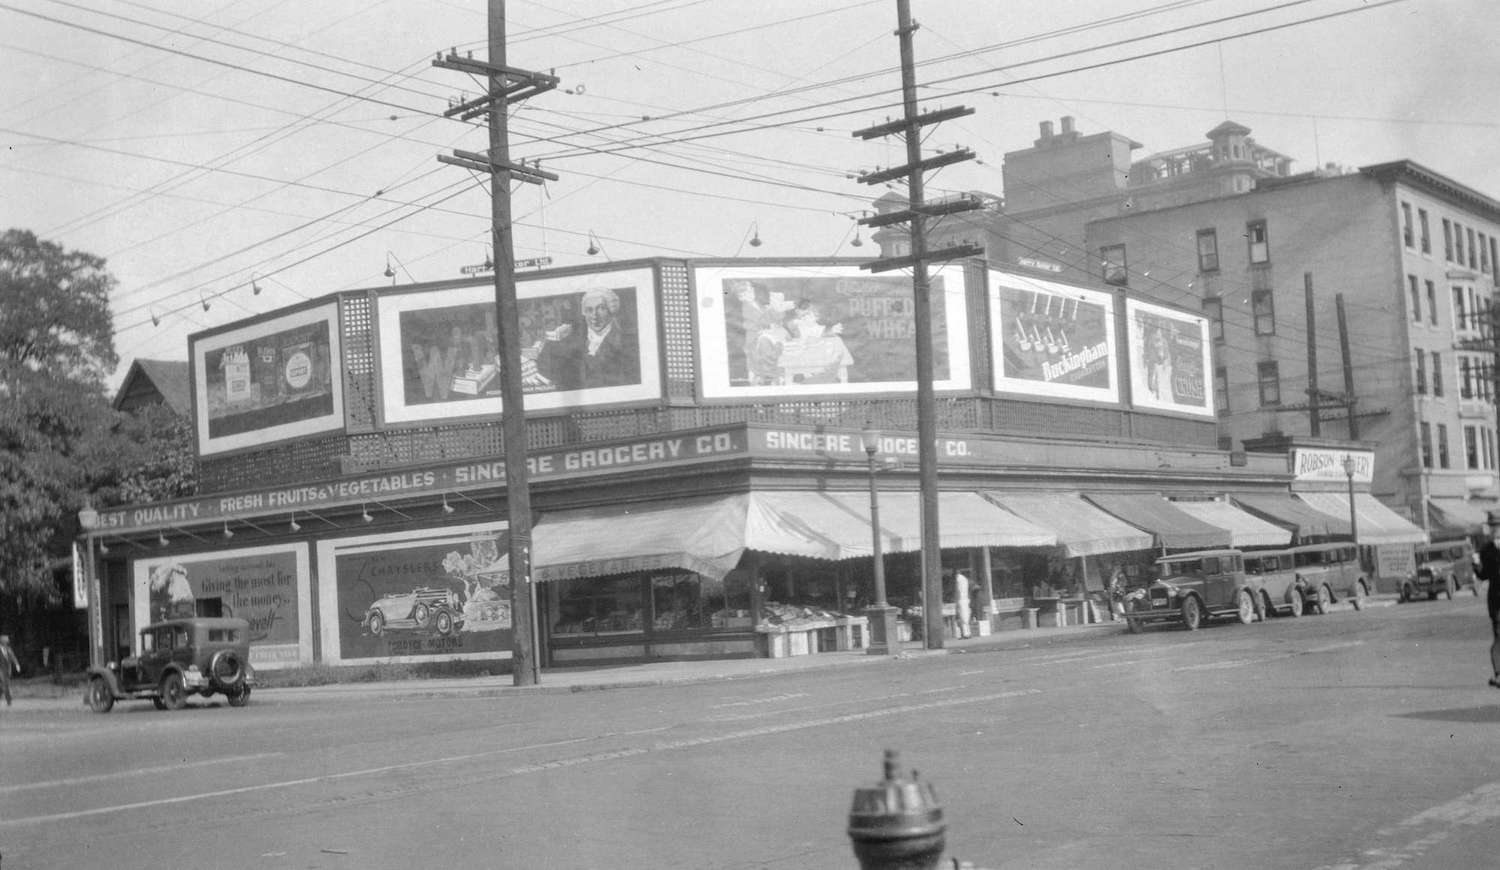 1925 - The Sincere Grocery store at 995 Robson Street